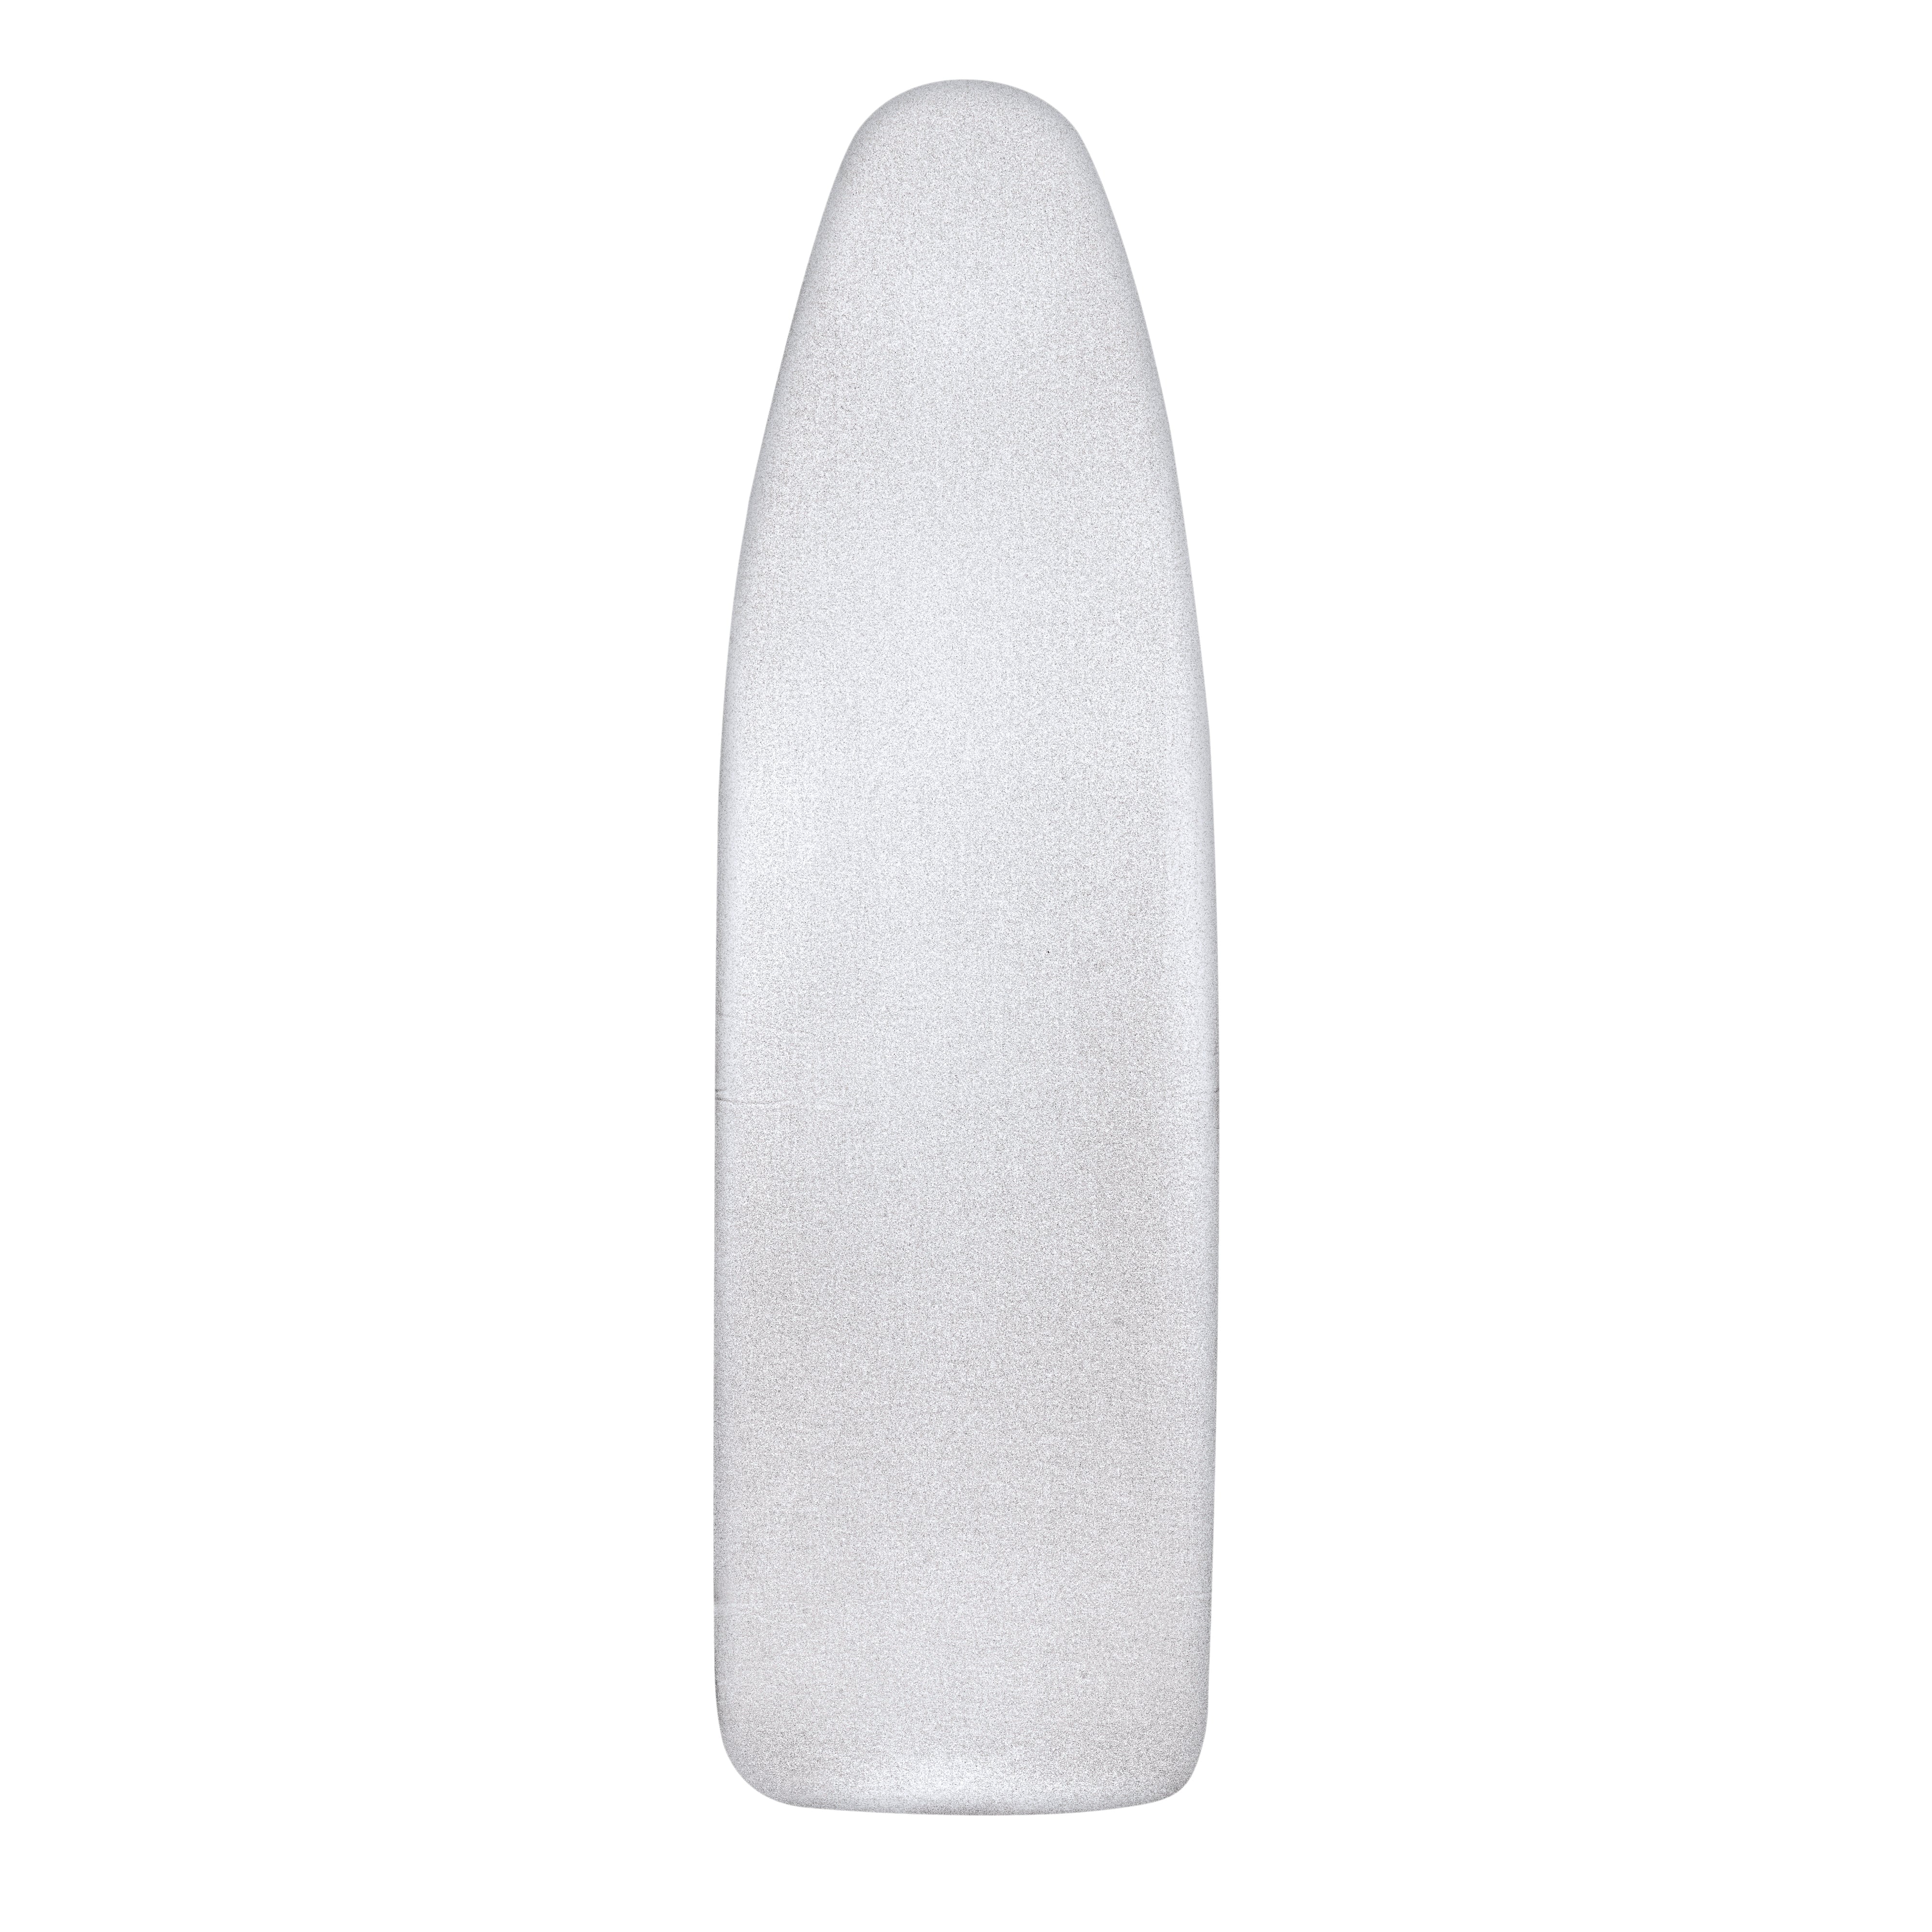 Metallised Ironing Board Cover XL - 137 x 40cm | Pendeford